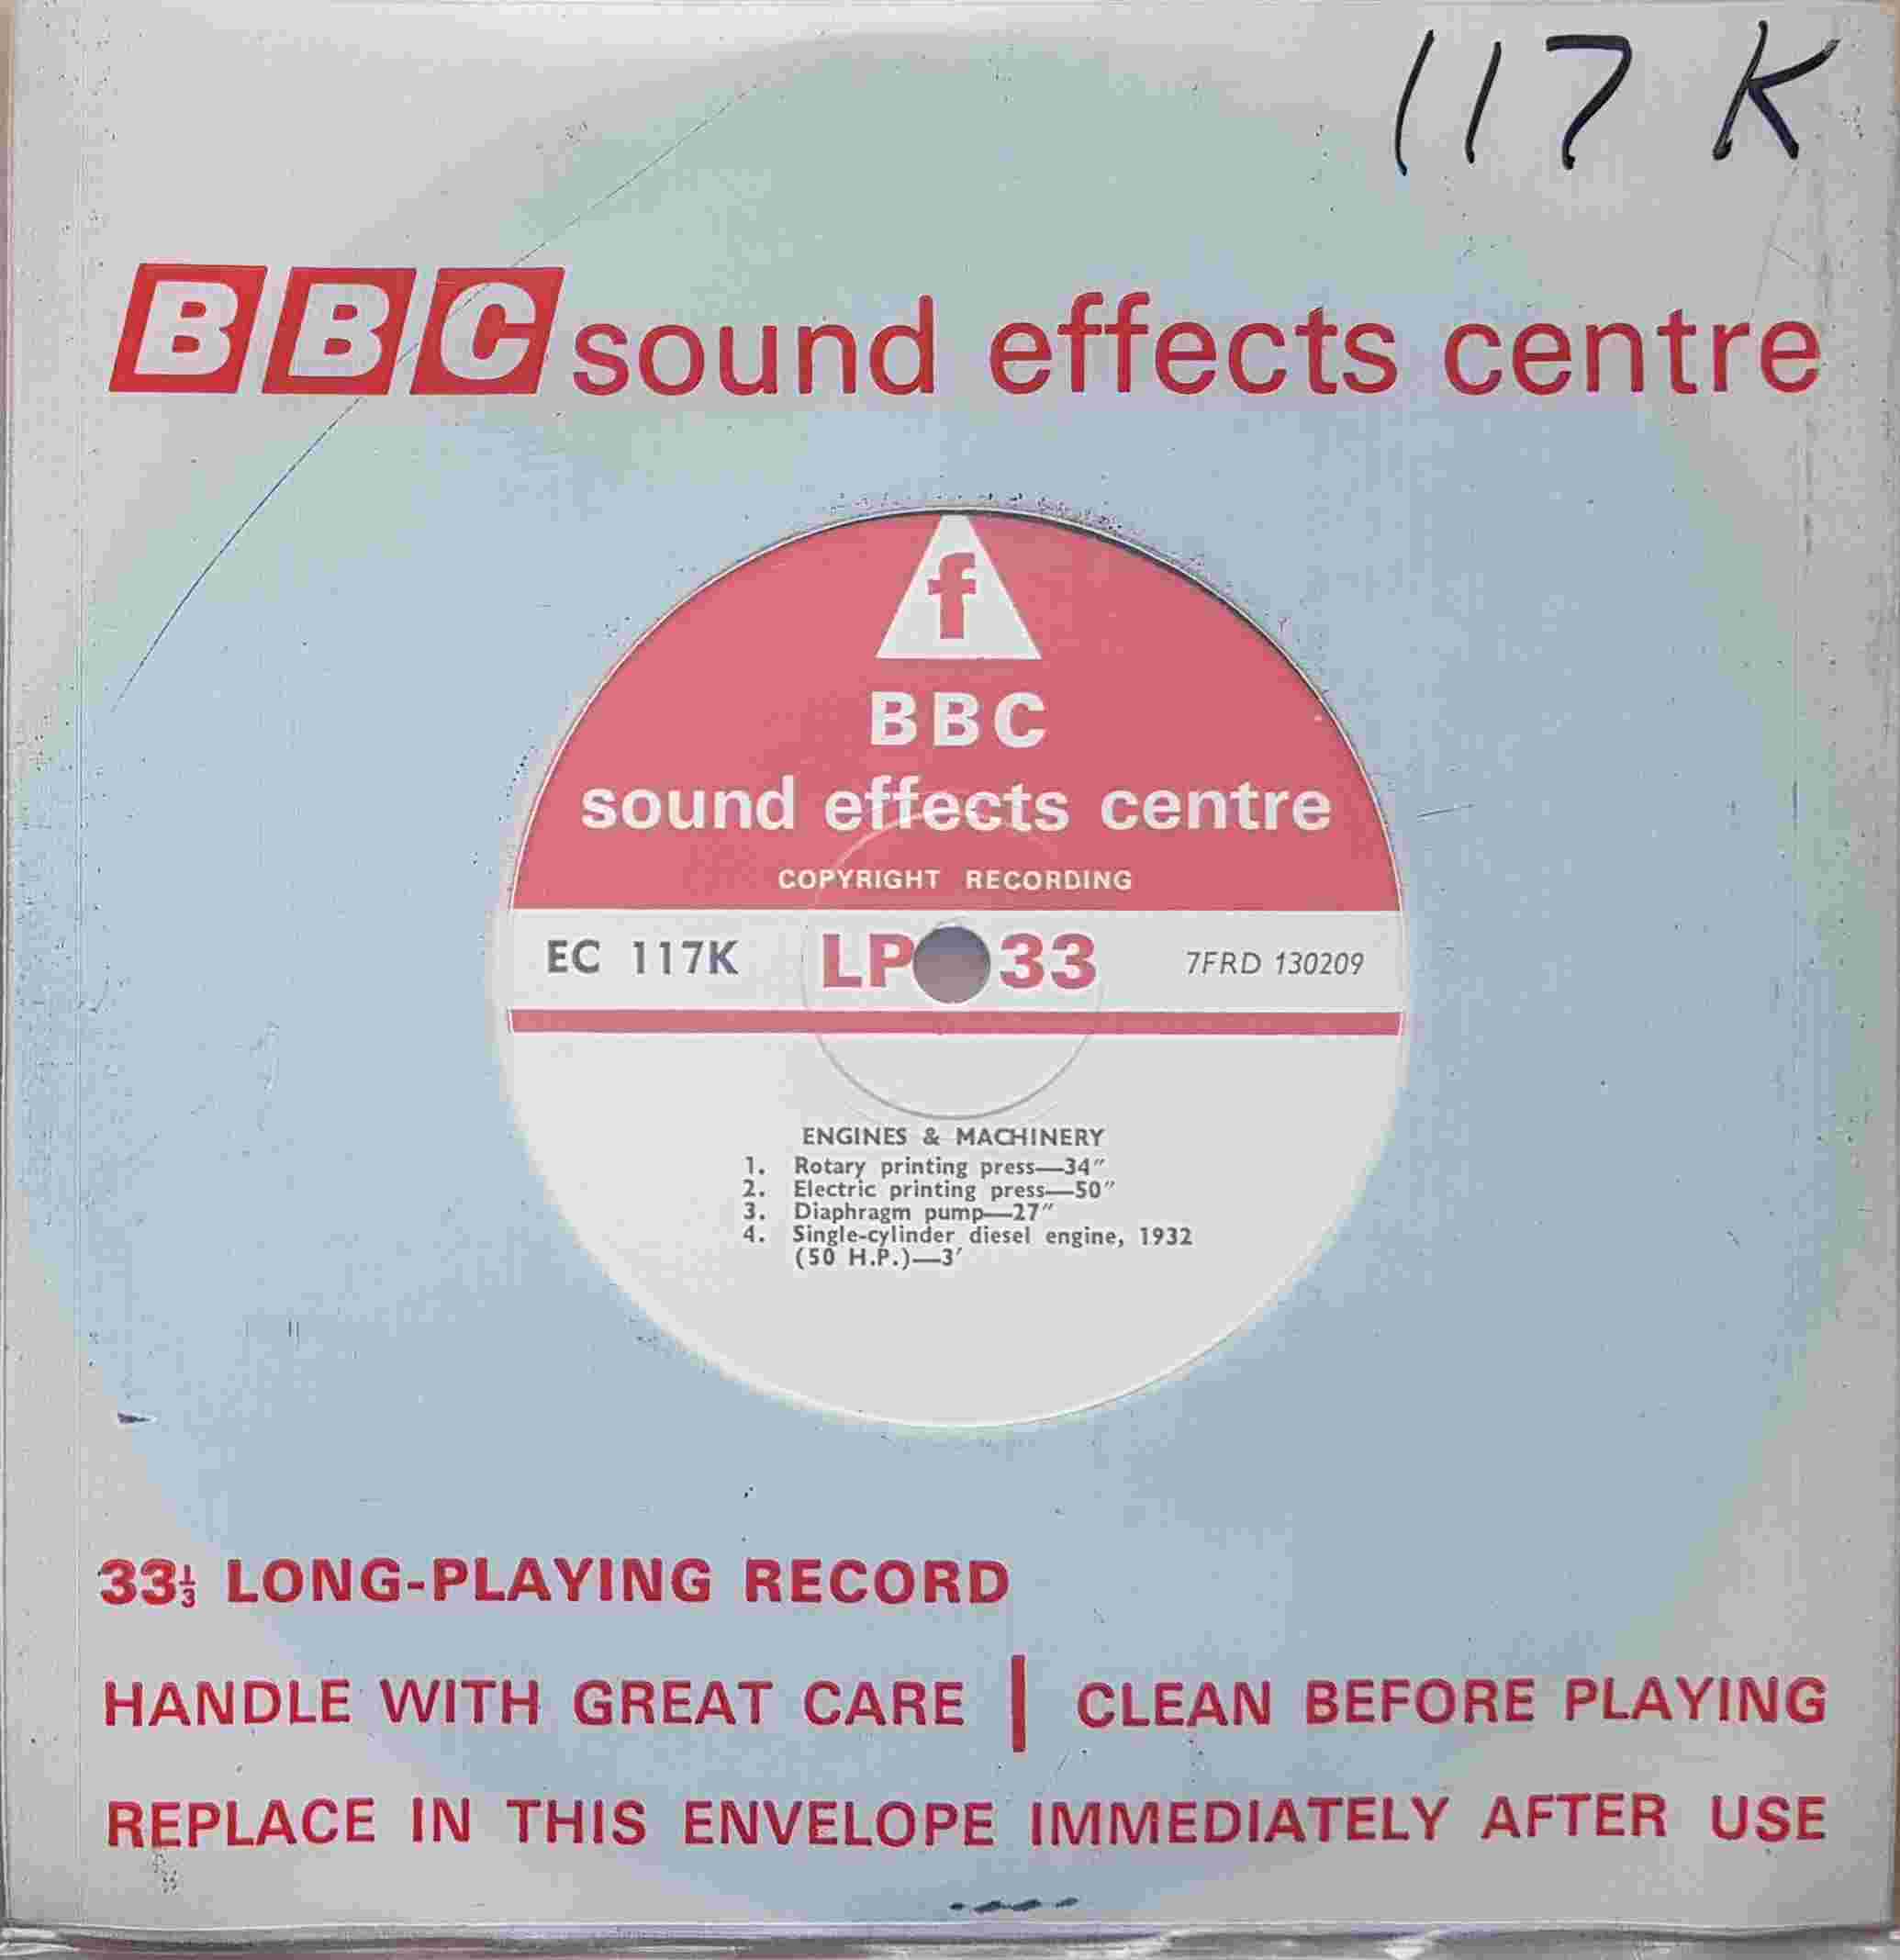 Picture of EC 117K Engines & machinery by artist Not registered from the BBC singles - Records and Tapes library